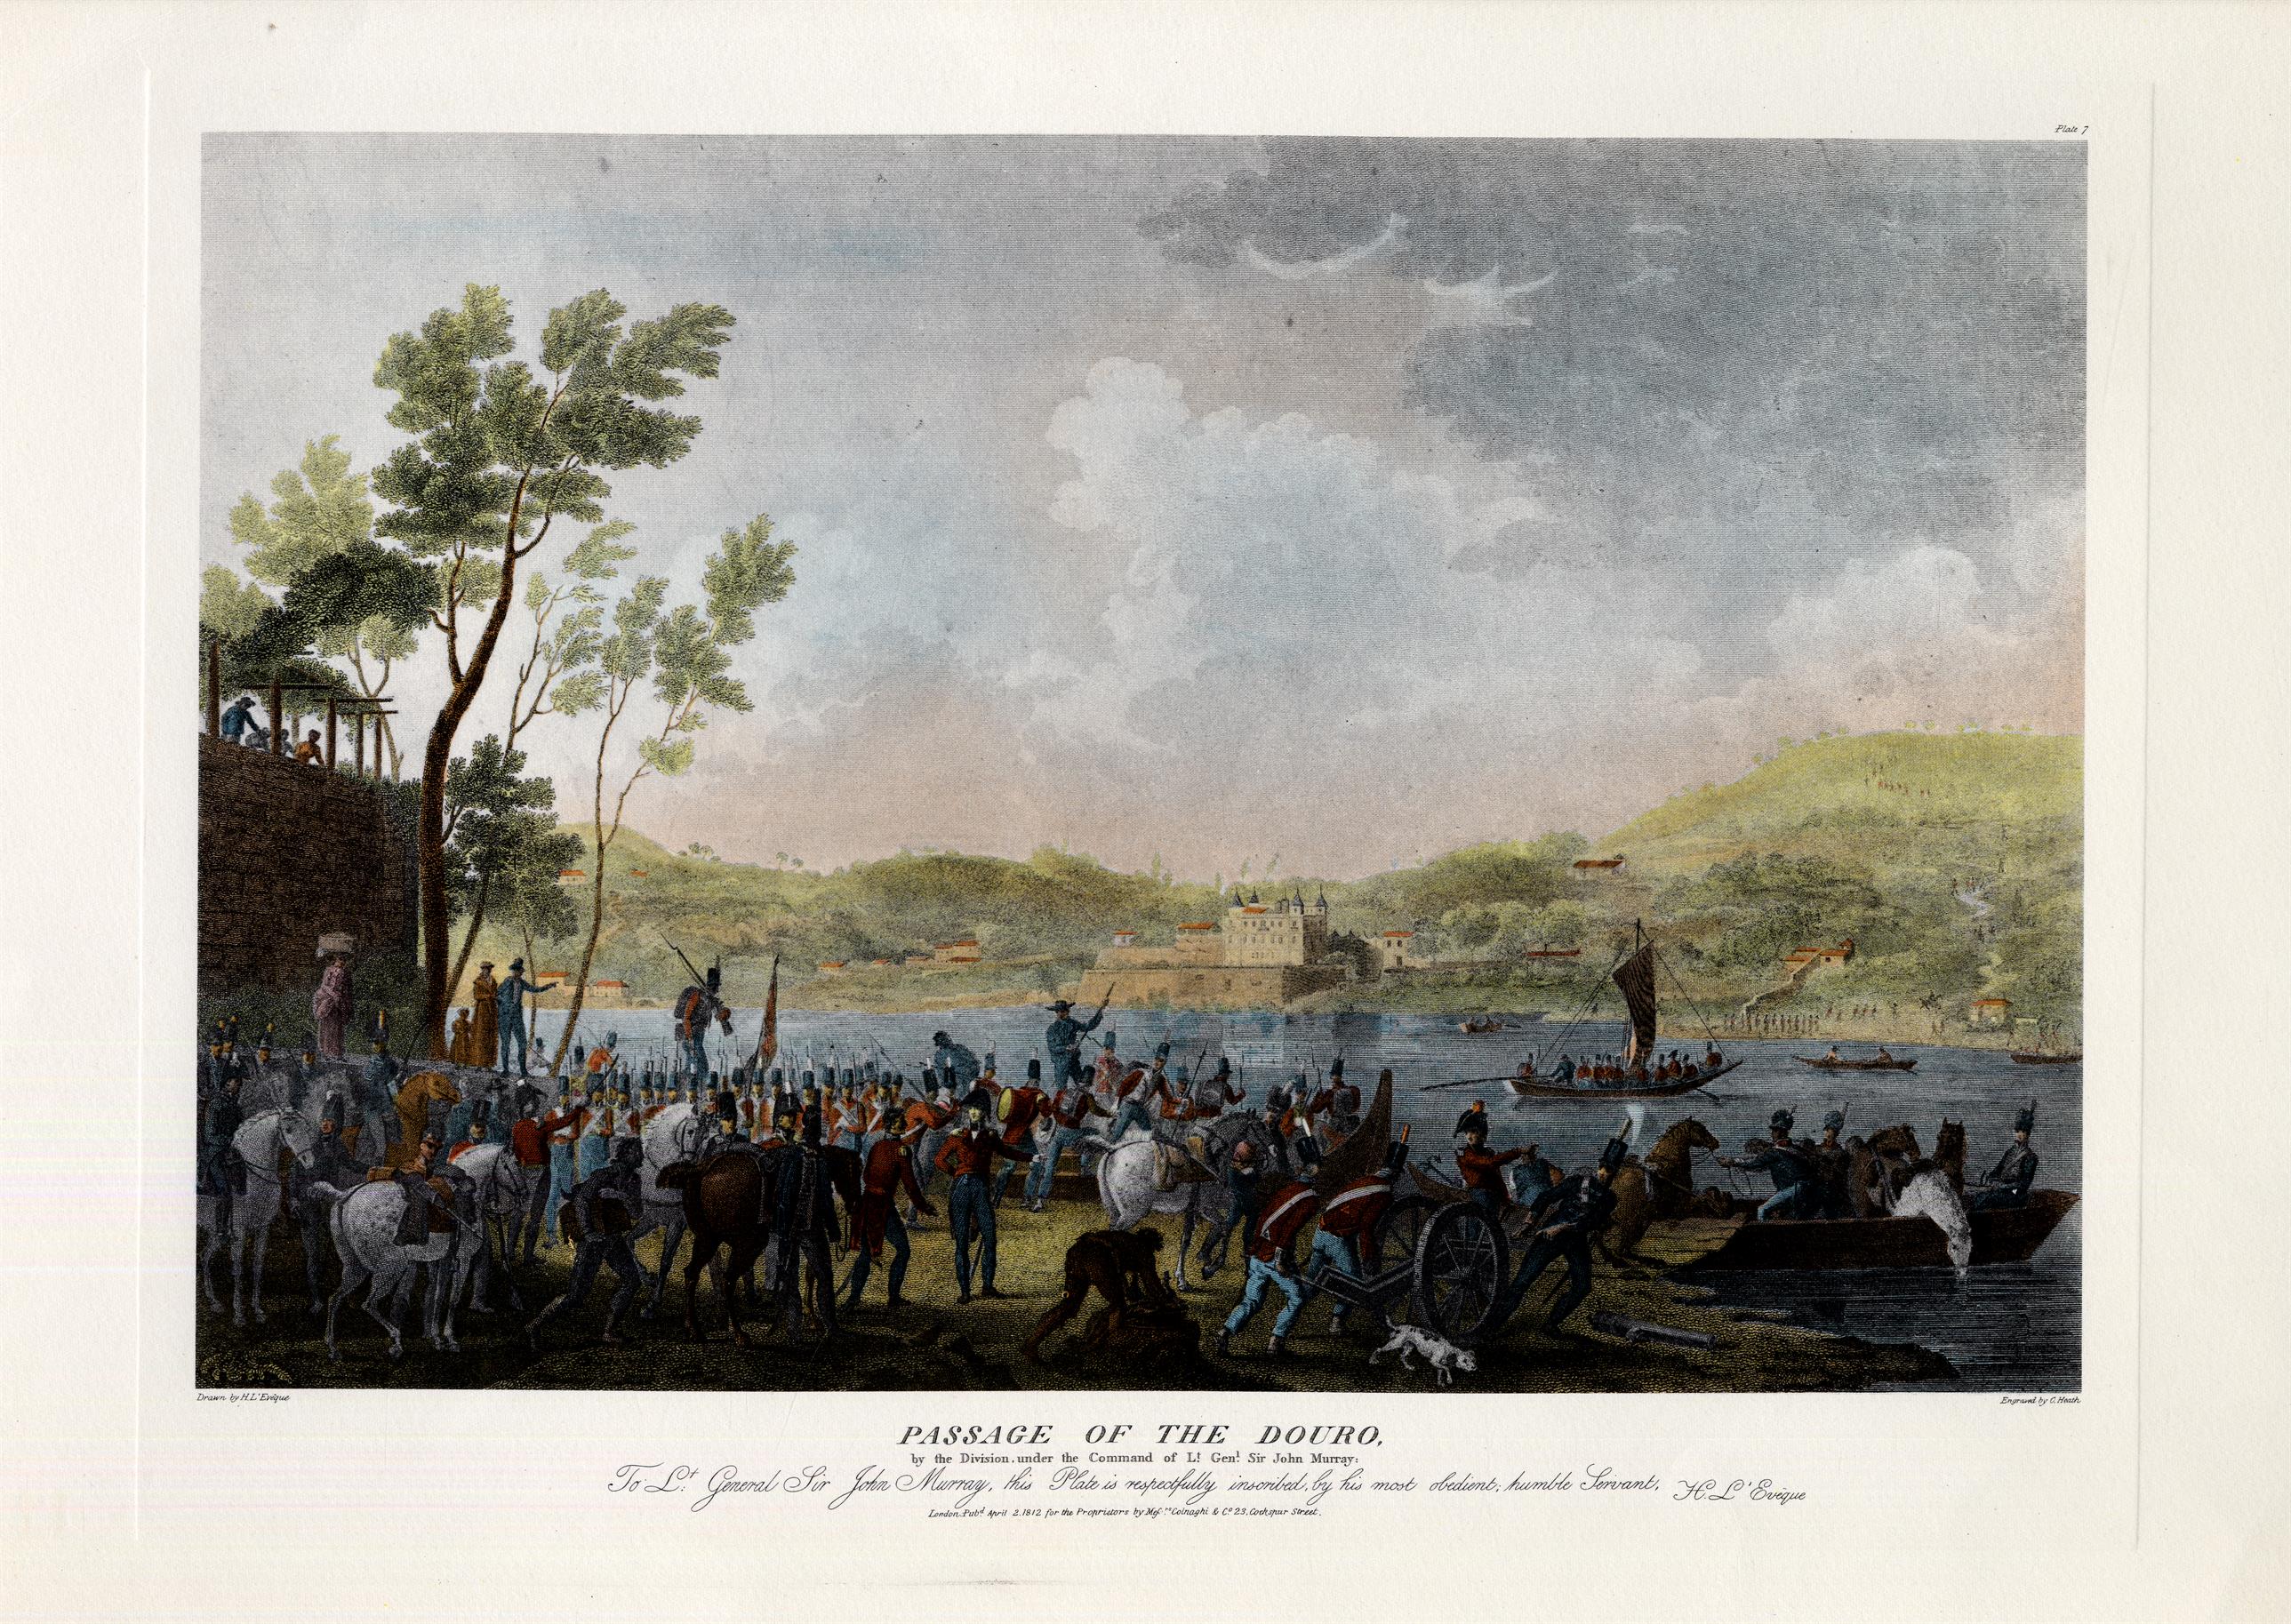 Passage of the Douro by the division under the command of Lt. Gen. Sir John Murray